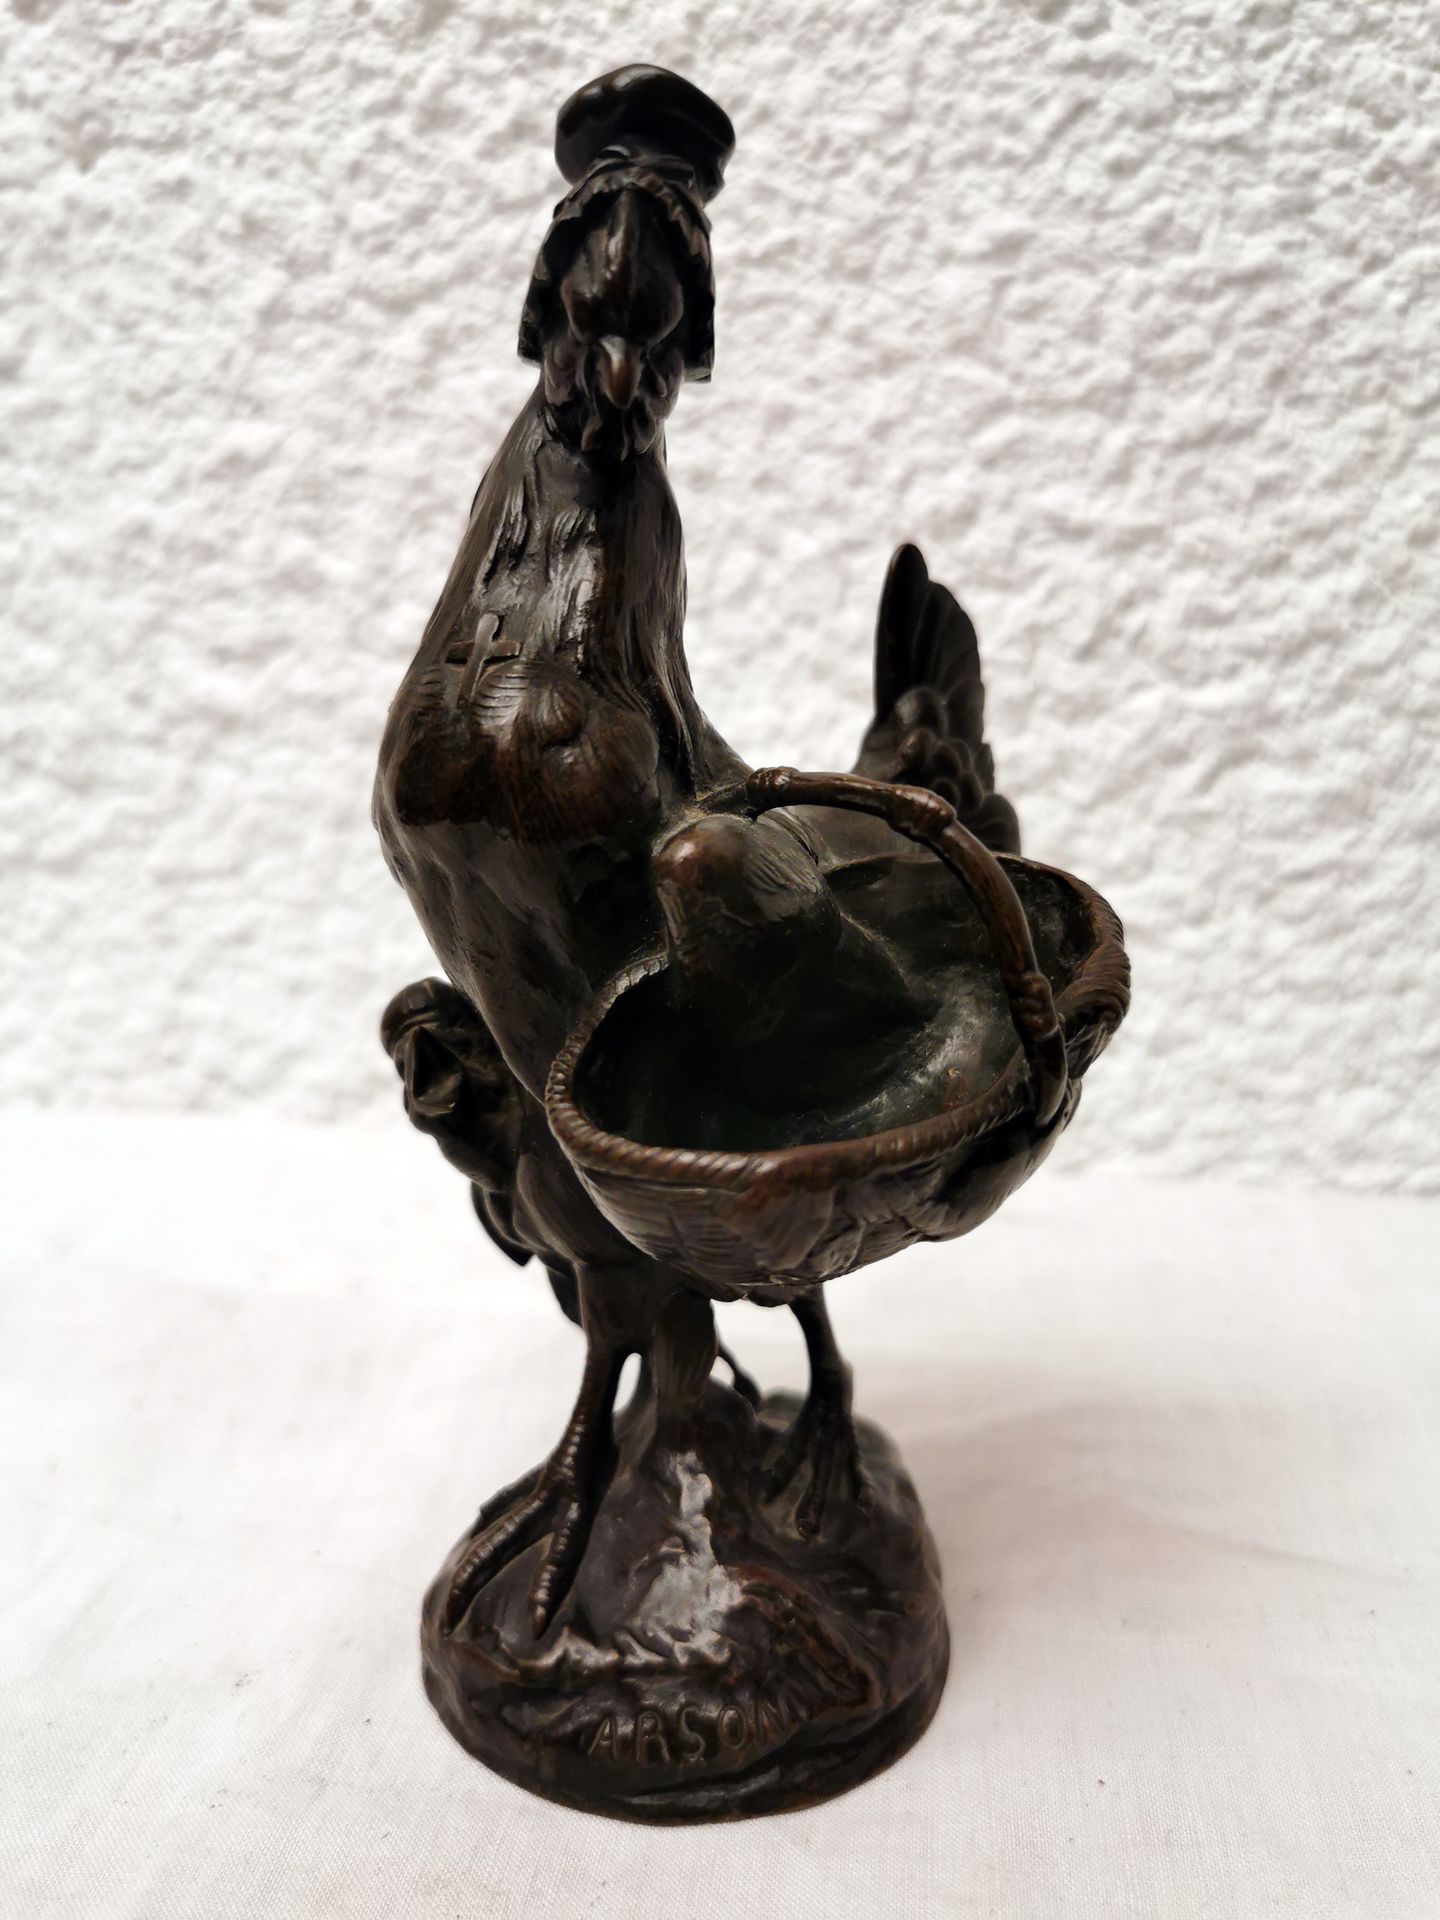 LA POULE VA AU MARCHE LA POULE VA AU MARCHE BRONZE PATINE MEDAILLE 16X9X7